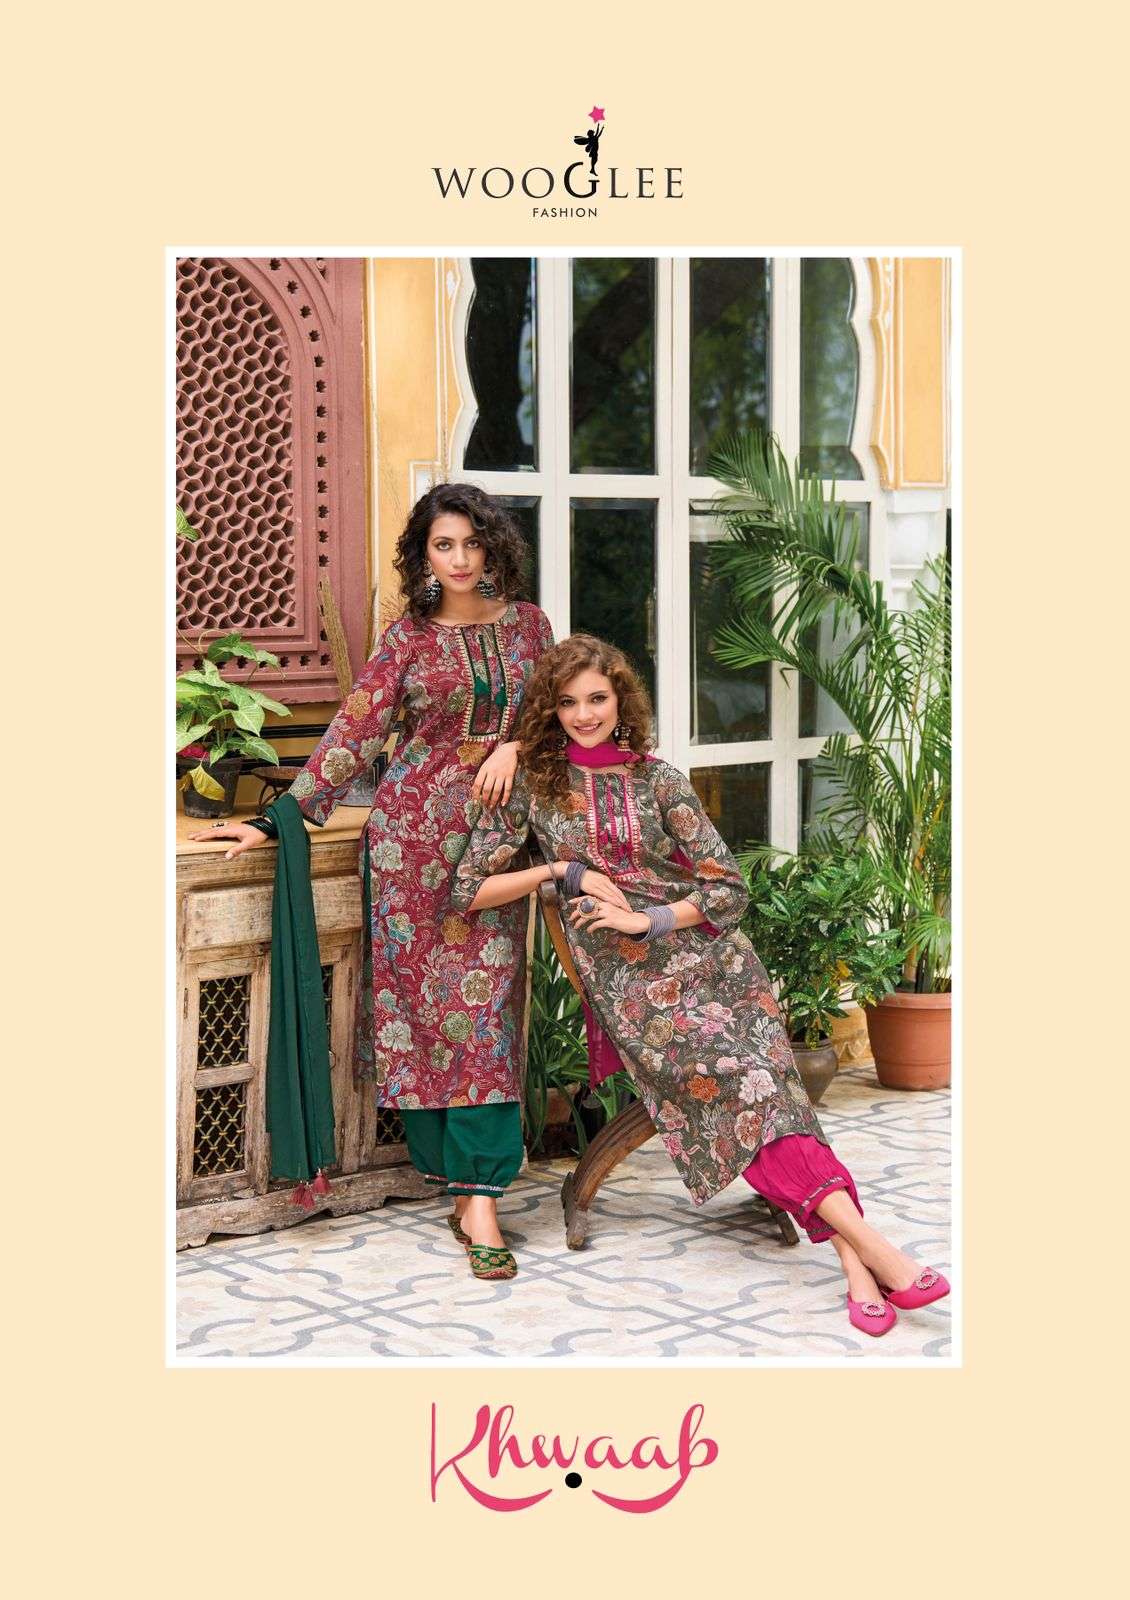 KHWAAB MODAL PRINT EMBROIDERY AND HANDWORK KURTI WITH PANT AND NAZMIN CHIFON DUPATTA BY WOOGLEE BRAN...